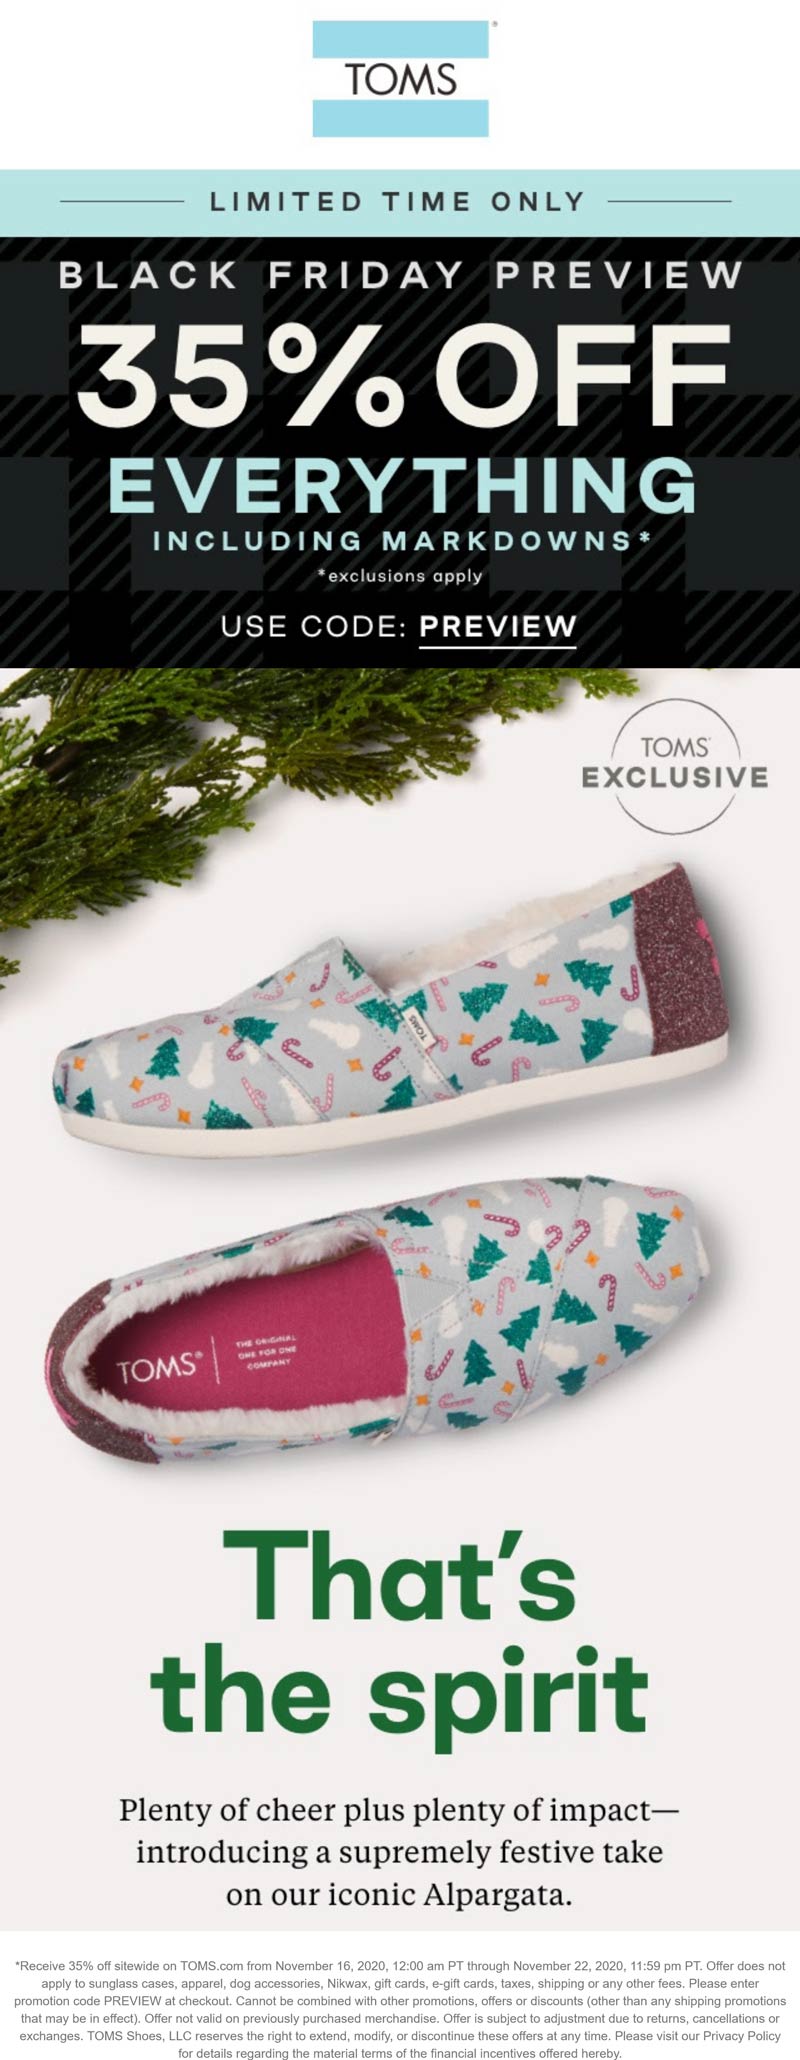 Toms stores Coupon  35% off everything at Toms shoes via promo code PREVIEW #toms 